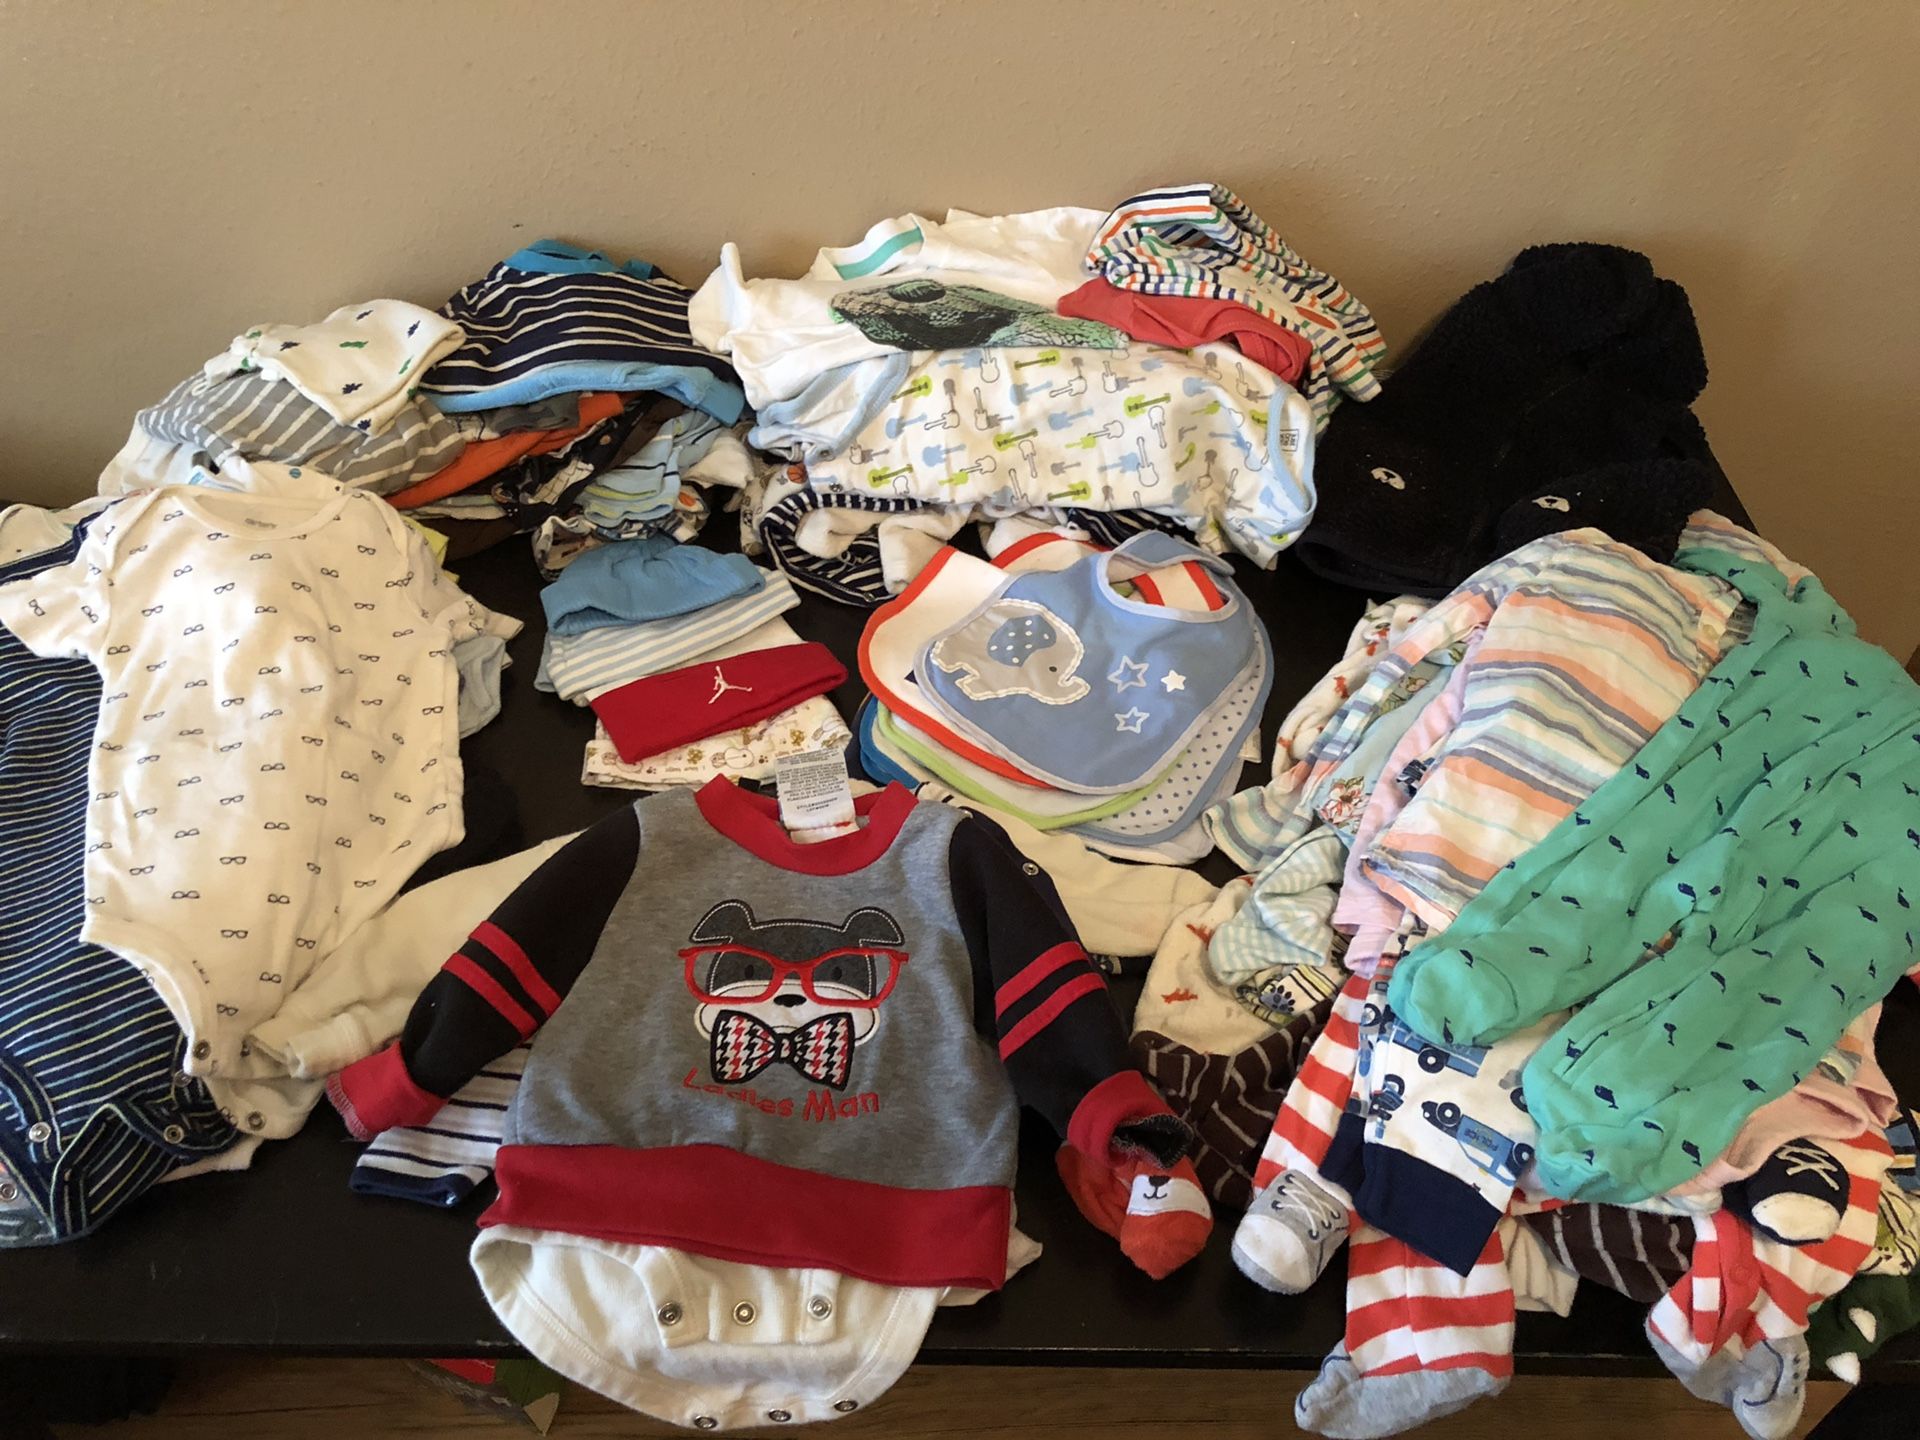 Full box of clothes 90 pcs size 3- 24 months